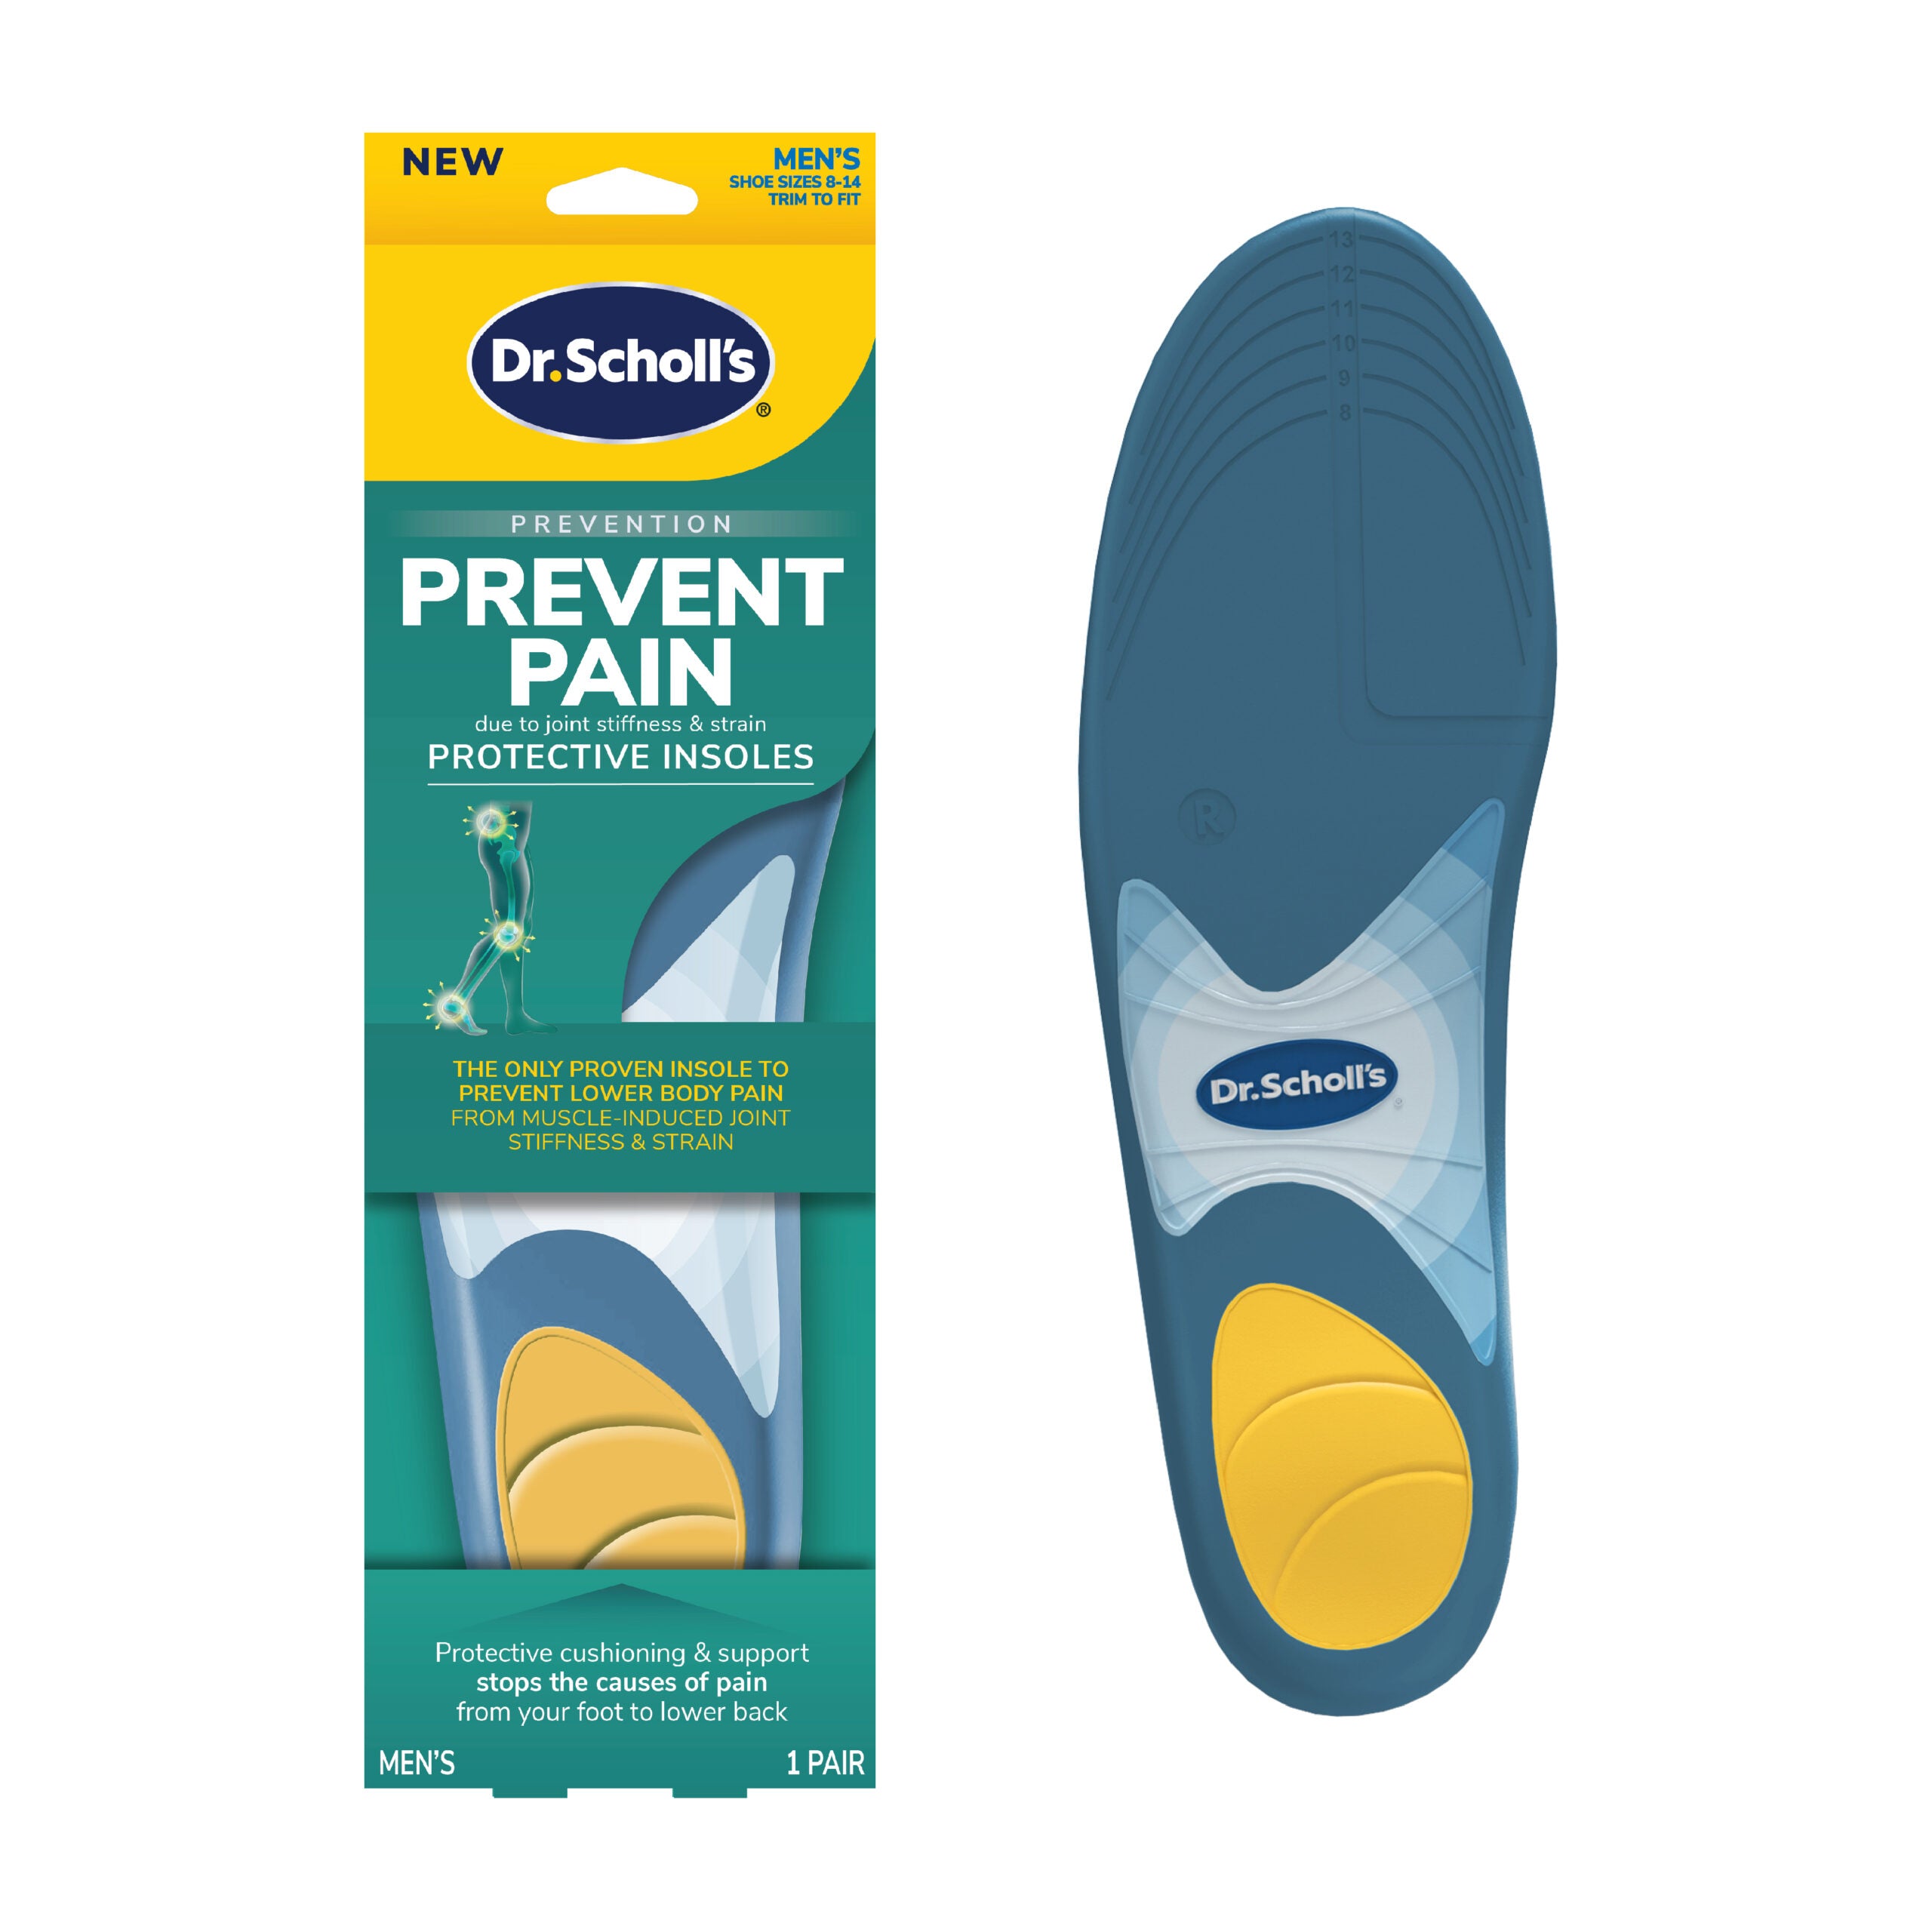 Dr. Scholl's Canada